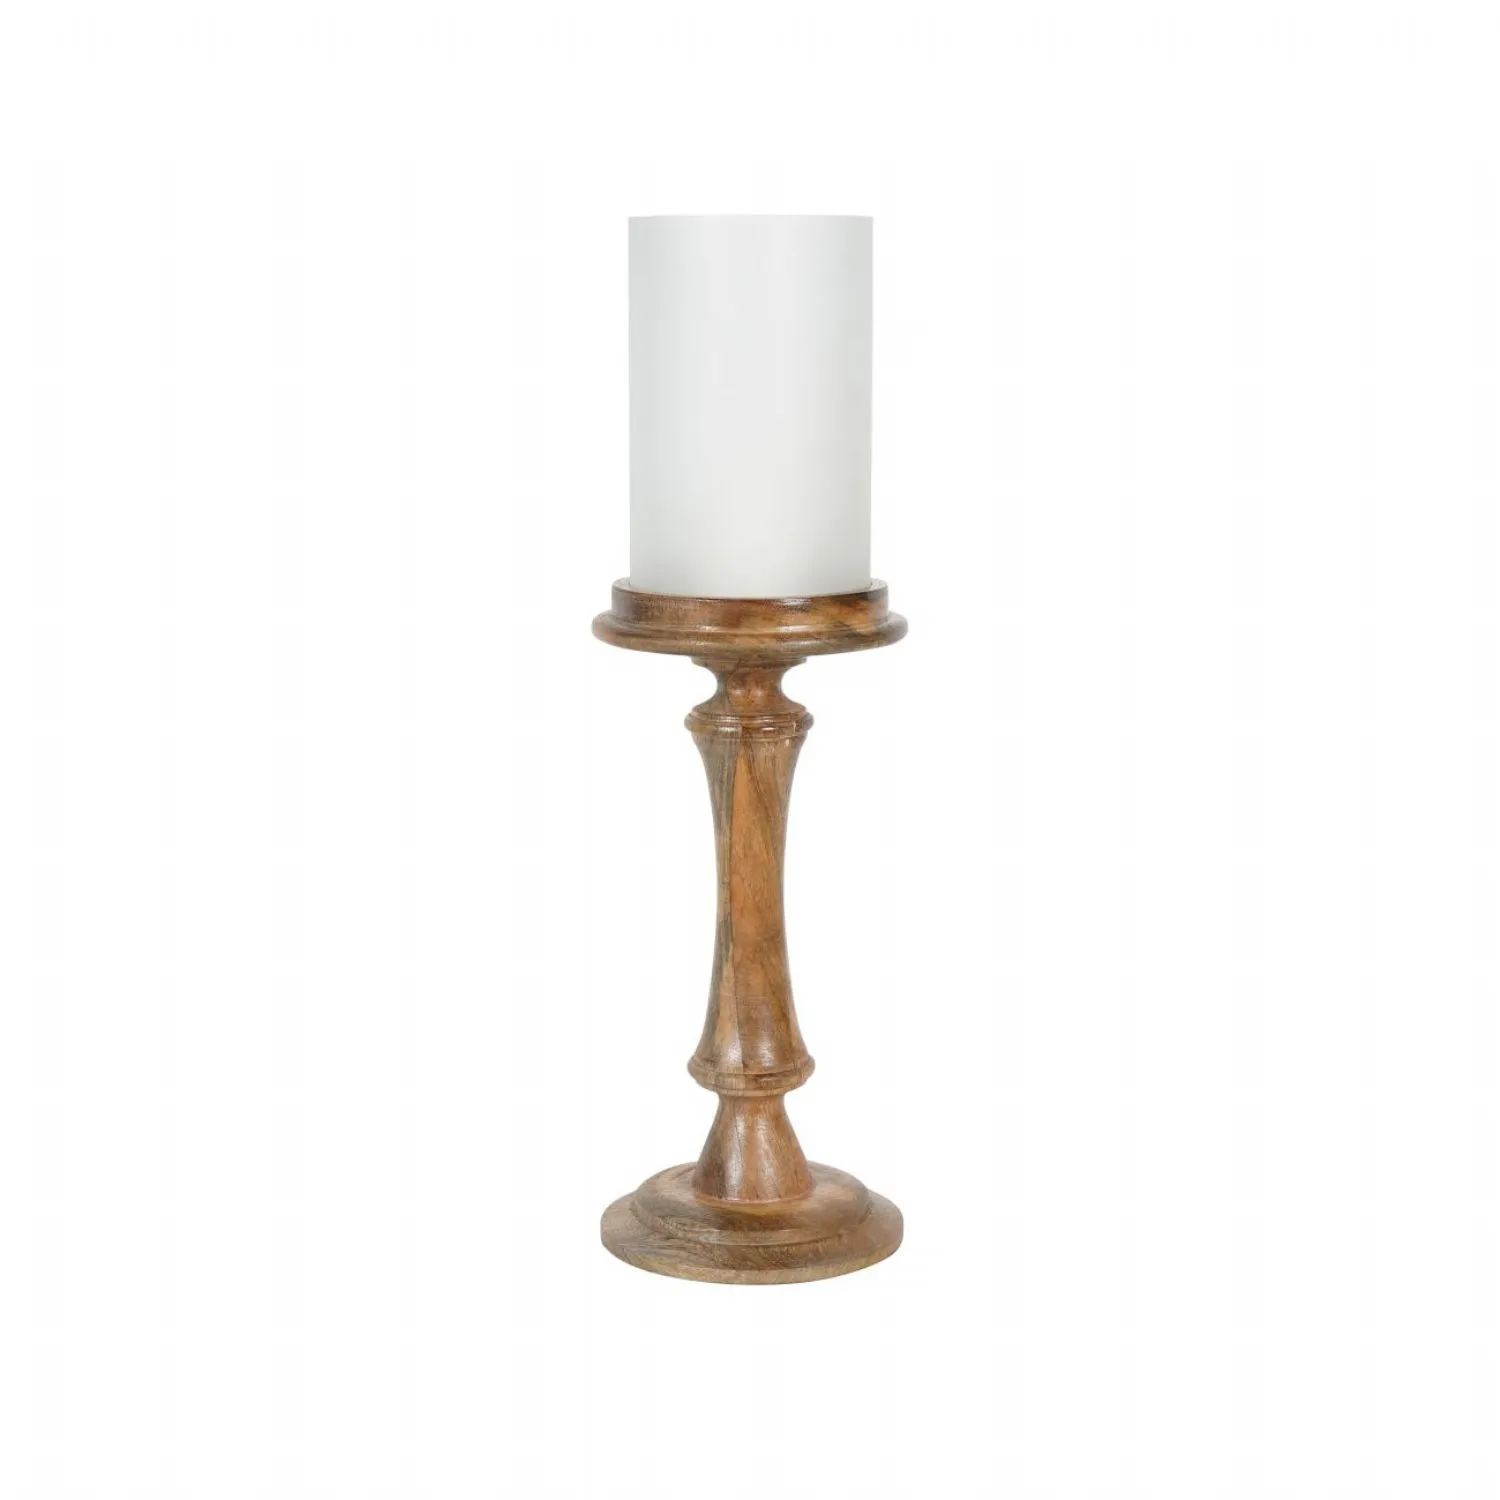 Laura Ashley Small Wooden Pedestal Hurricane with Frosted Glass